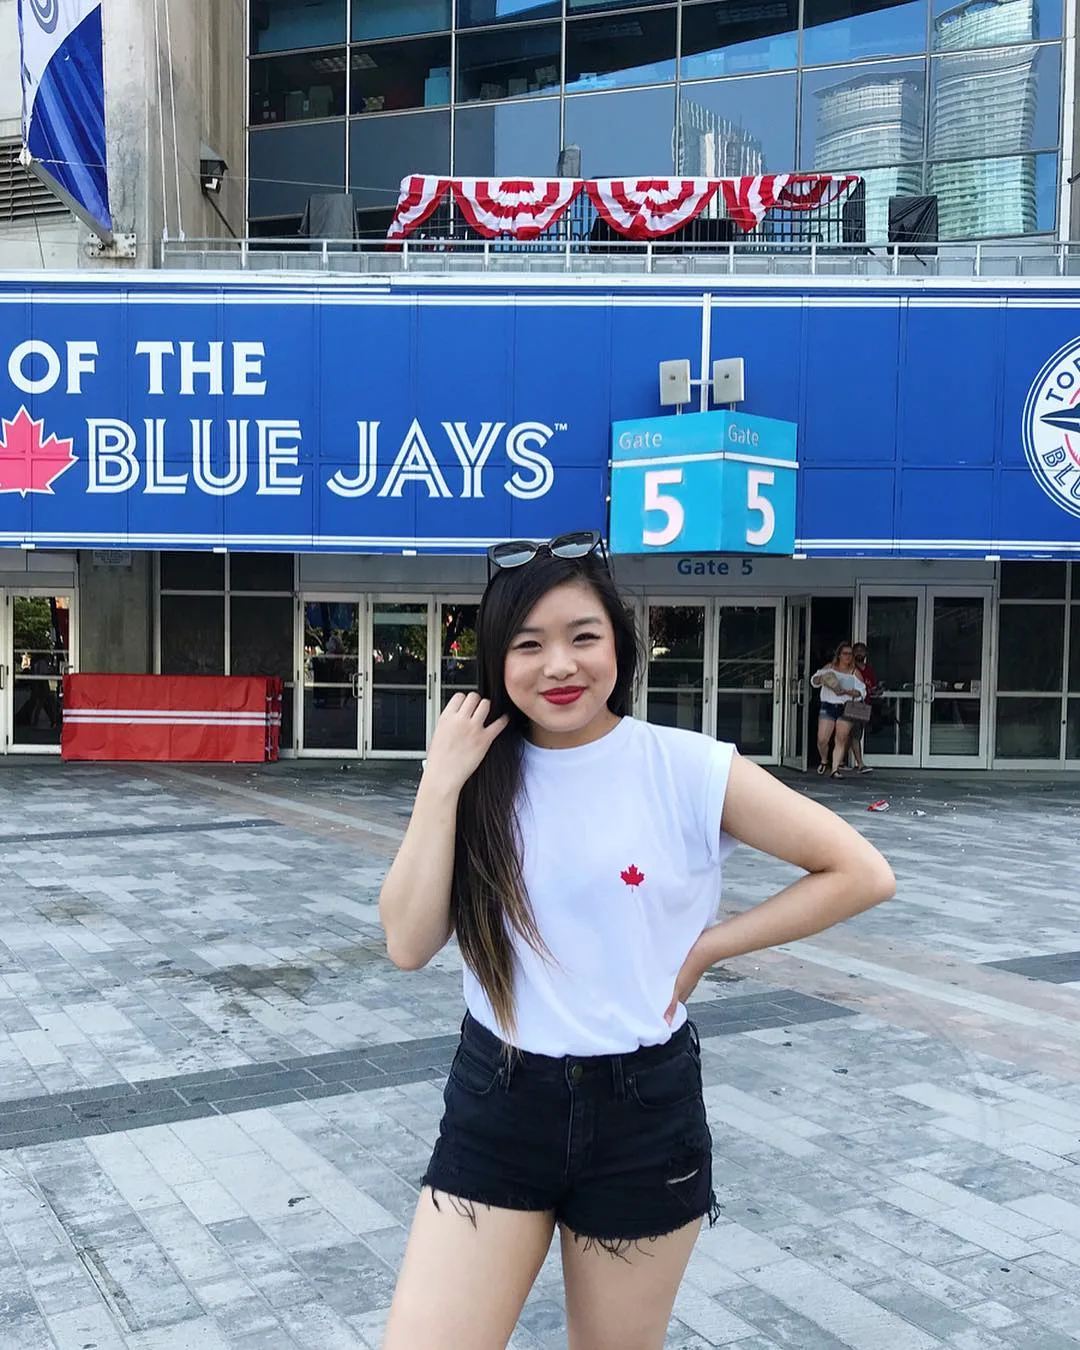 Rogers Centre in Toronto